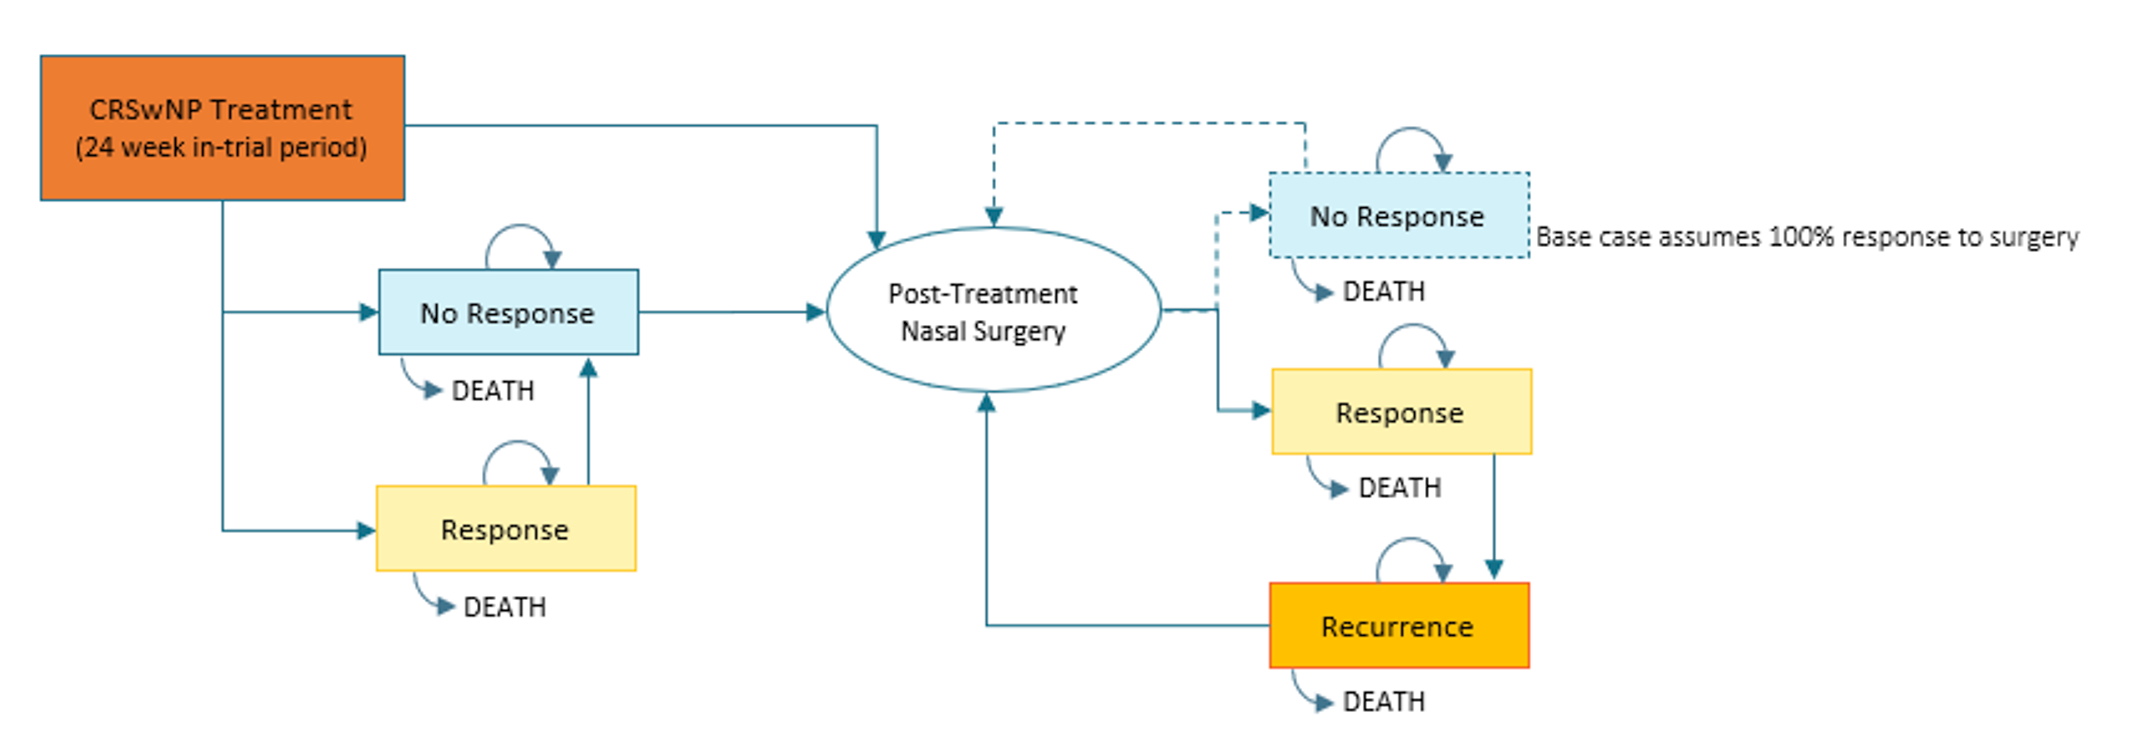 Depiction of the sponsor-submitted Markov model with health states based on treatment response (“response” and “no response” health states), as well as health states based on outcomes of posttreatment nasal surgery (“post-surgery — response,” “post-surgery — no response,” and “post-surgery — recurrence” health states). All patients with CRSwNP enter the model either on treatment with mepolizumab plus SoC or with SoC alone. Following response assessment at 24 weeks, patients were classified as responders or nonresponders and moved the to corresponding state. Patients defined as responders at week 24 could either continue treatment or discontinue mepolizumab and enter the “no response” health state at a secondary assessment time point at week 52. Responders were assumed to not be at risk of requiring surgery, whereas nonresponders experienced a per-cycle probability of subsequent surgery. Upon posttreatment nasal surgery, patients experienced a probability of postsurgical disease recurrence for which they could then receive subsequent surgeries.